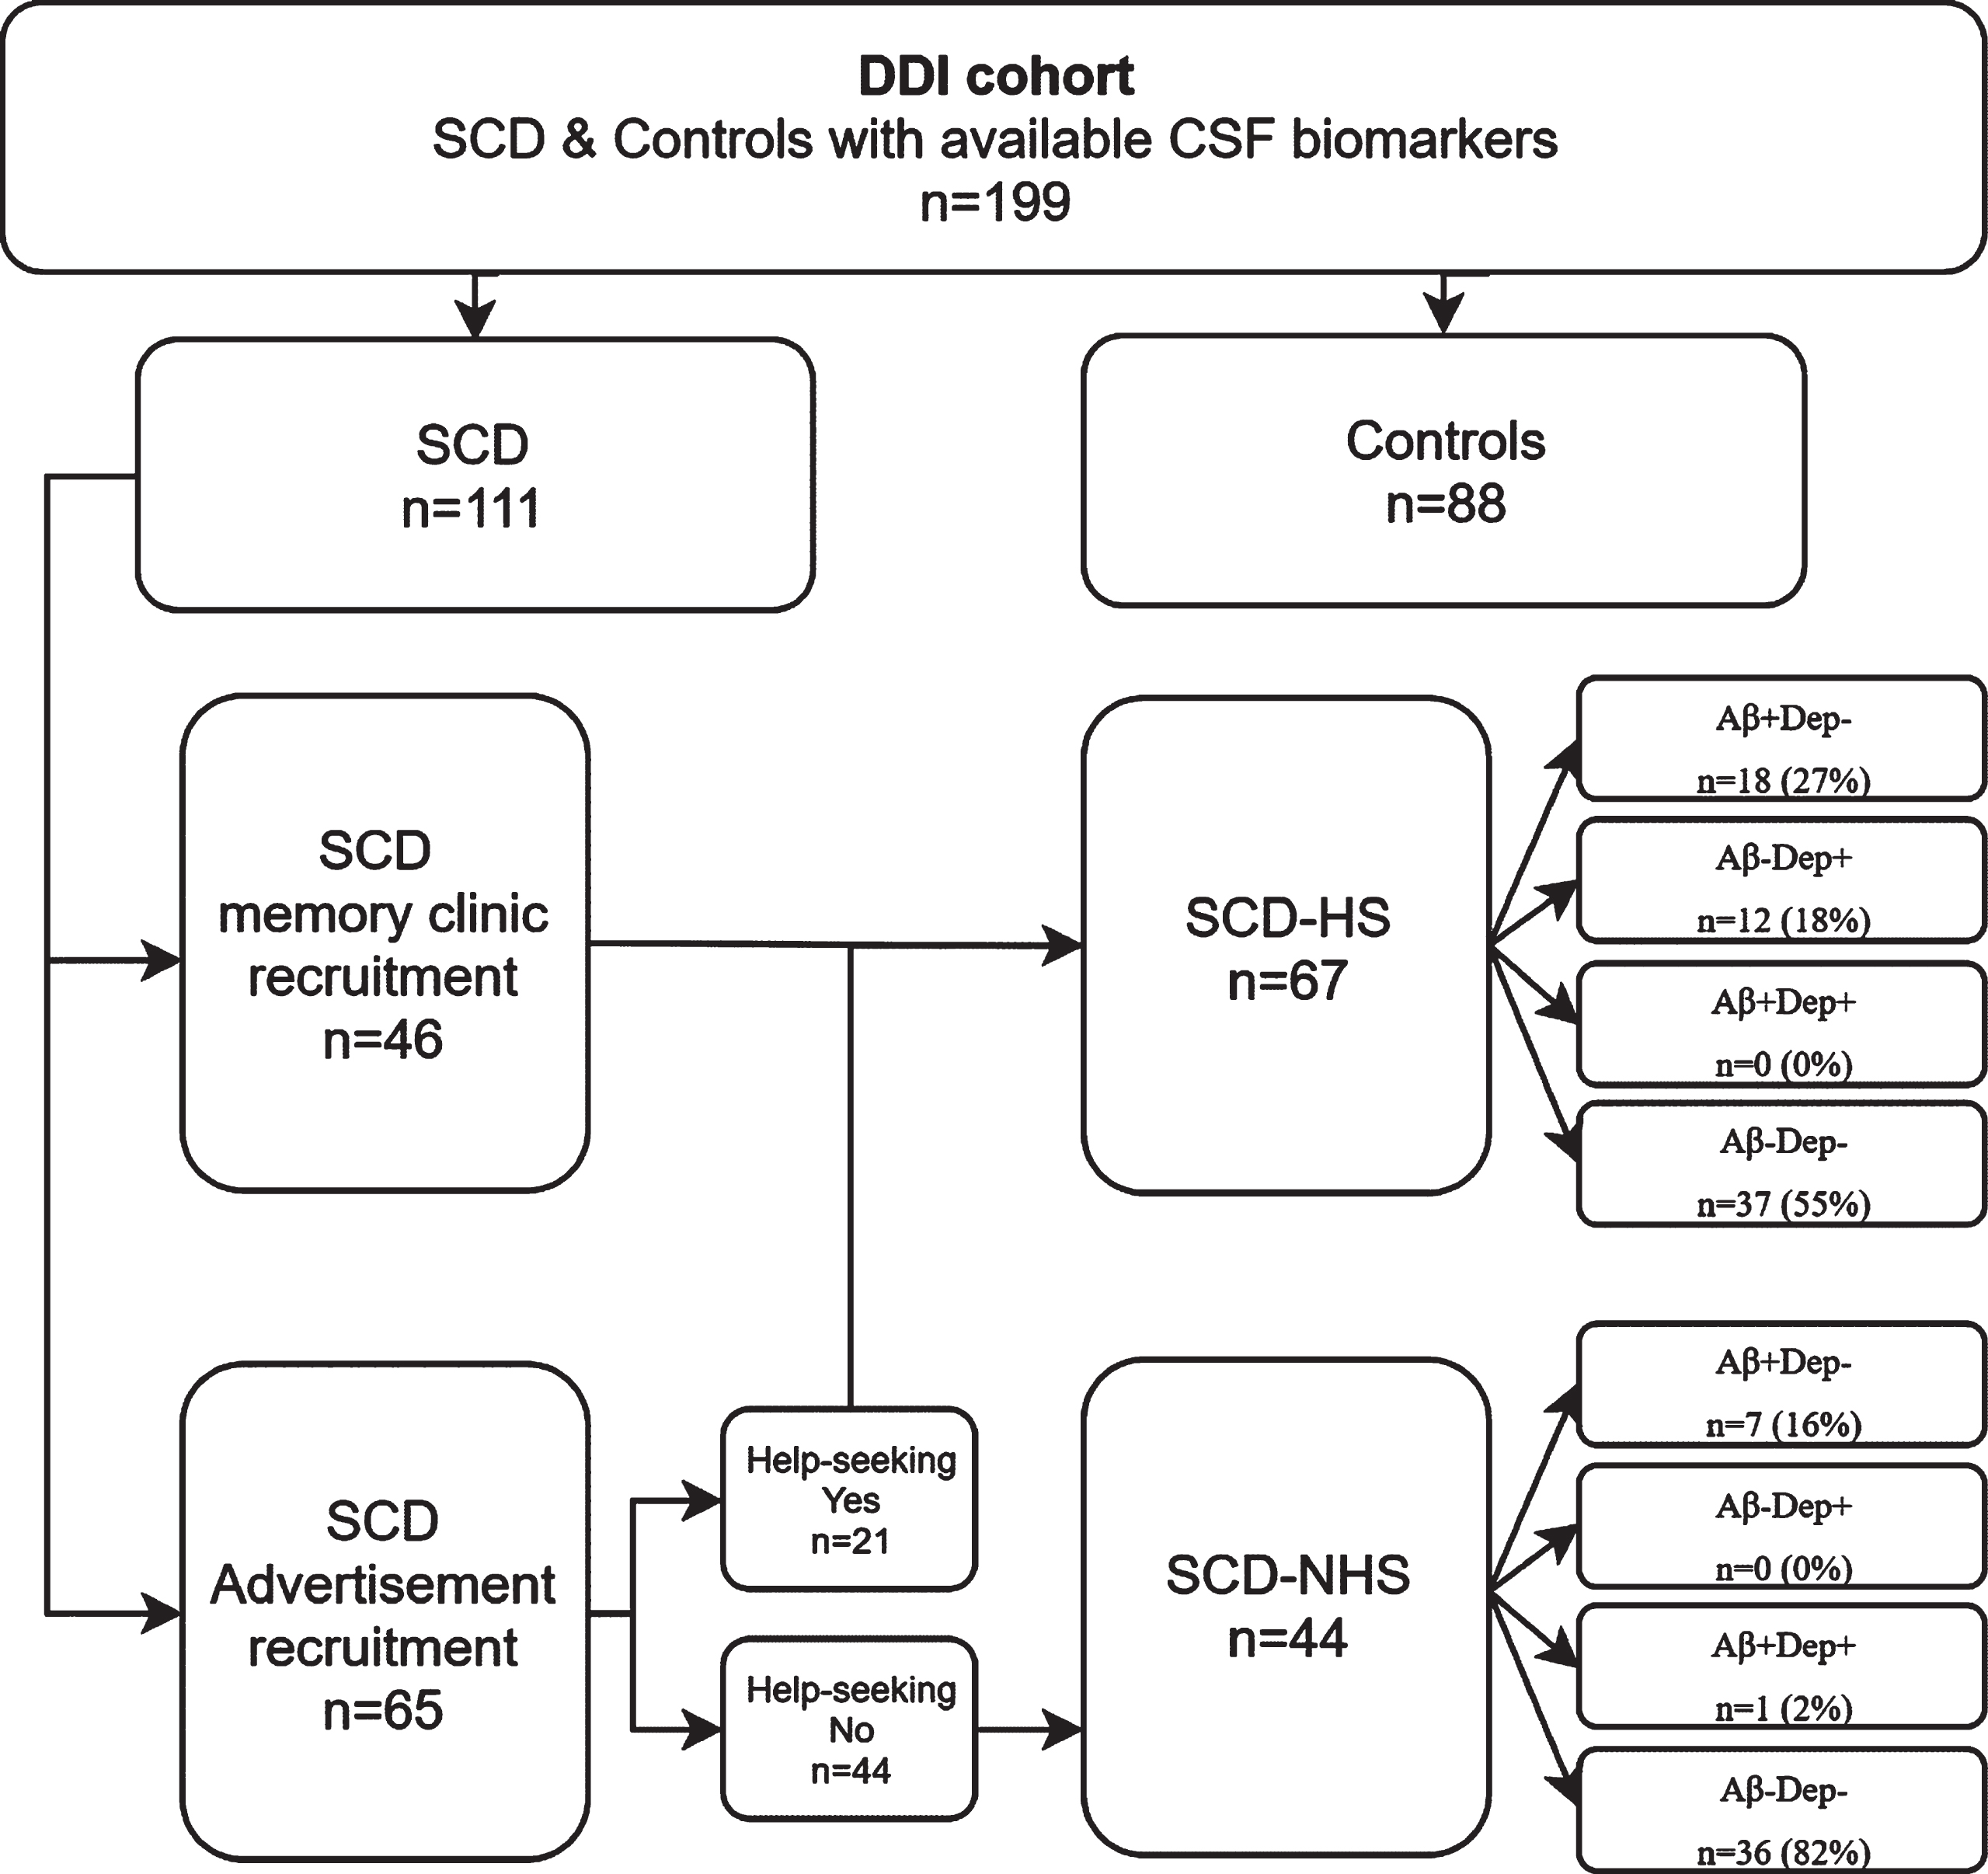 A total of n = 199 subjective cognitive decline (SCD) and controls from the Dementia Disease Initiation (DDI) cohort comprising n = 88 cognitively healthy controls, n = 67 SCD with a history of medical help seeking (SCD-HS) and n = 44 SCD non-help-seekers (SCD-NHS) were included.